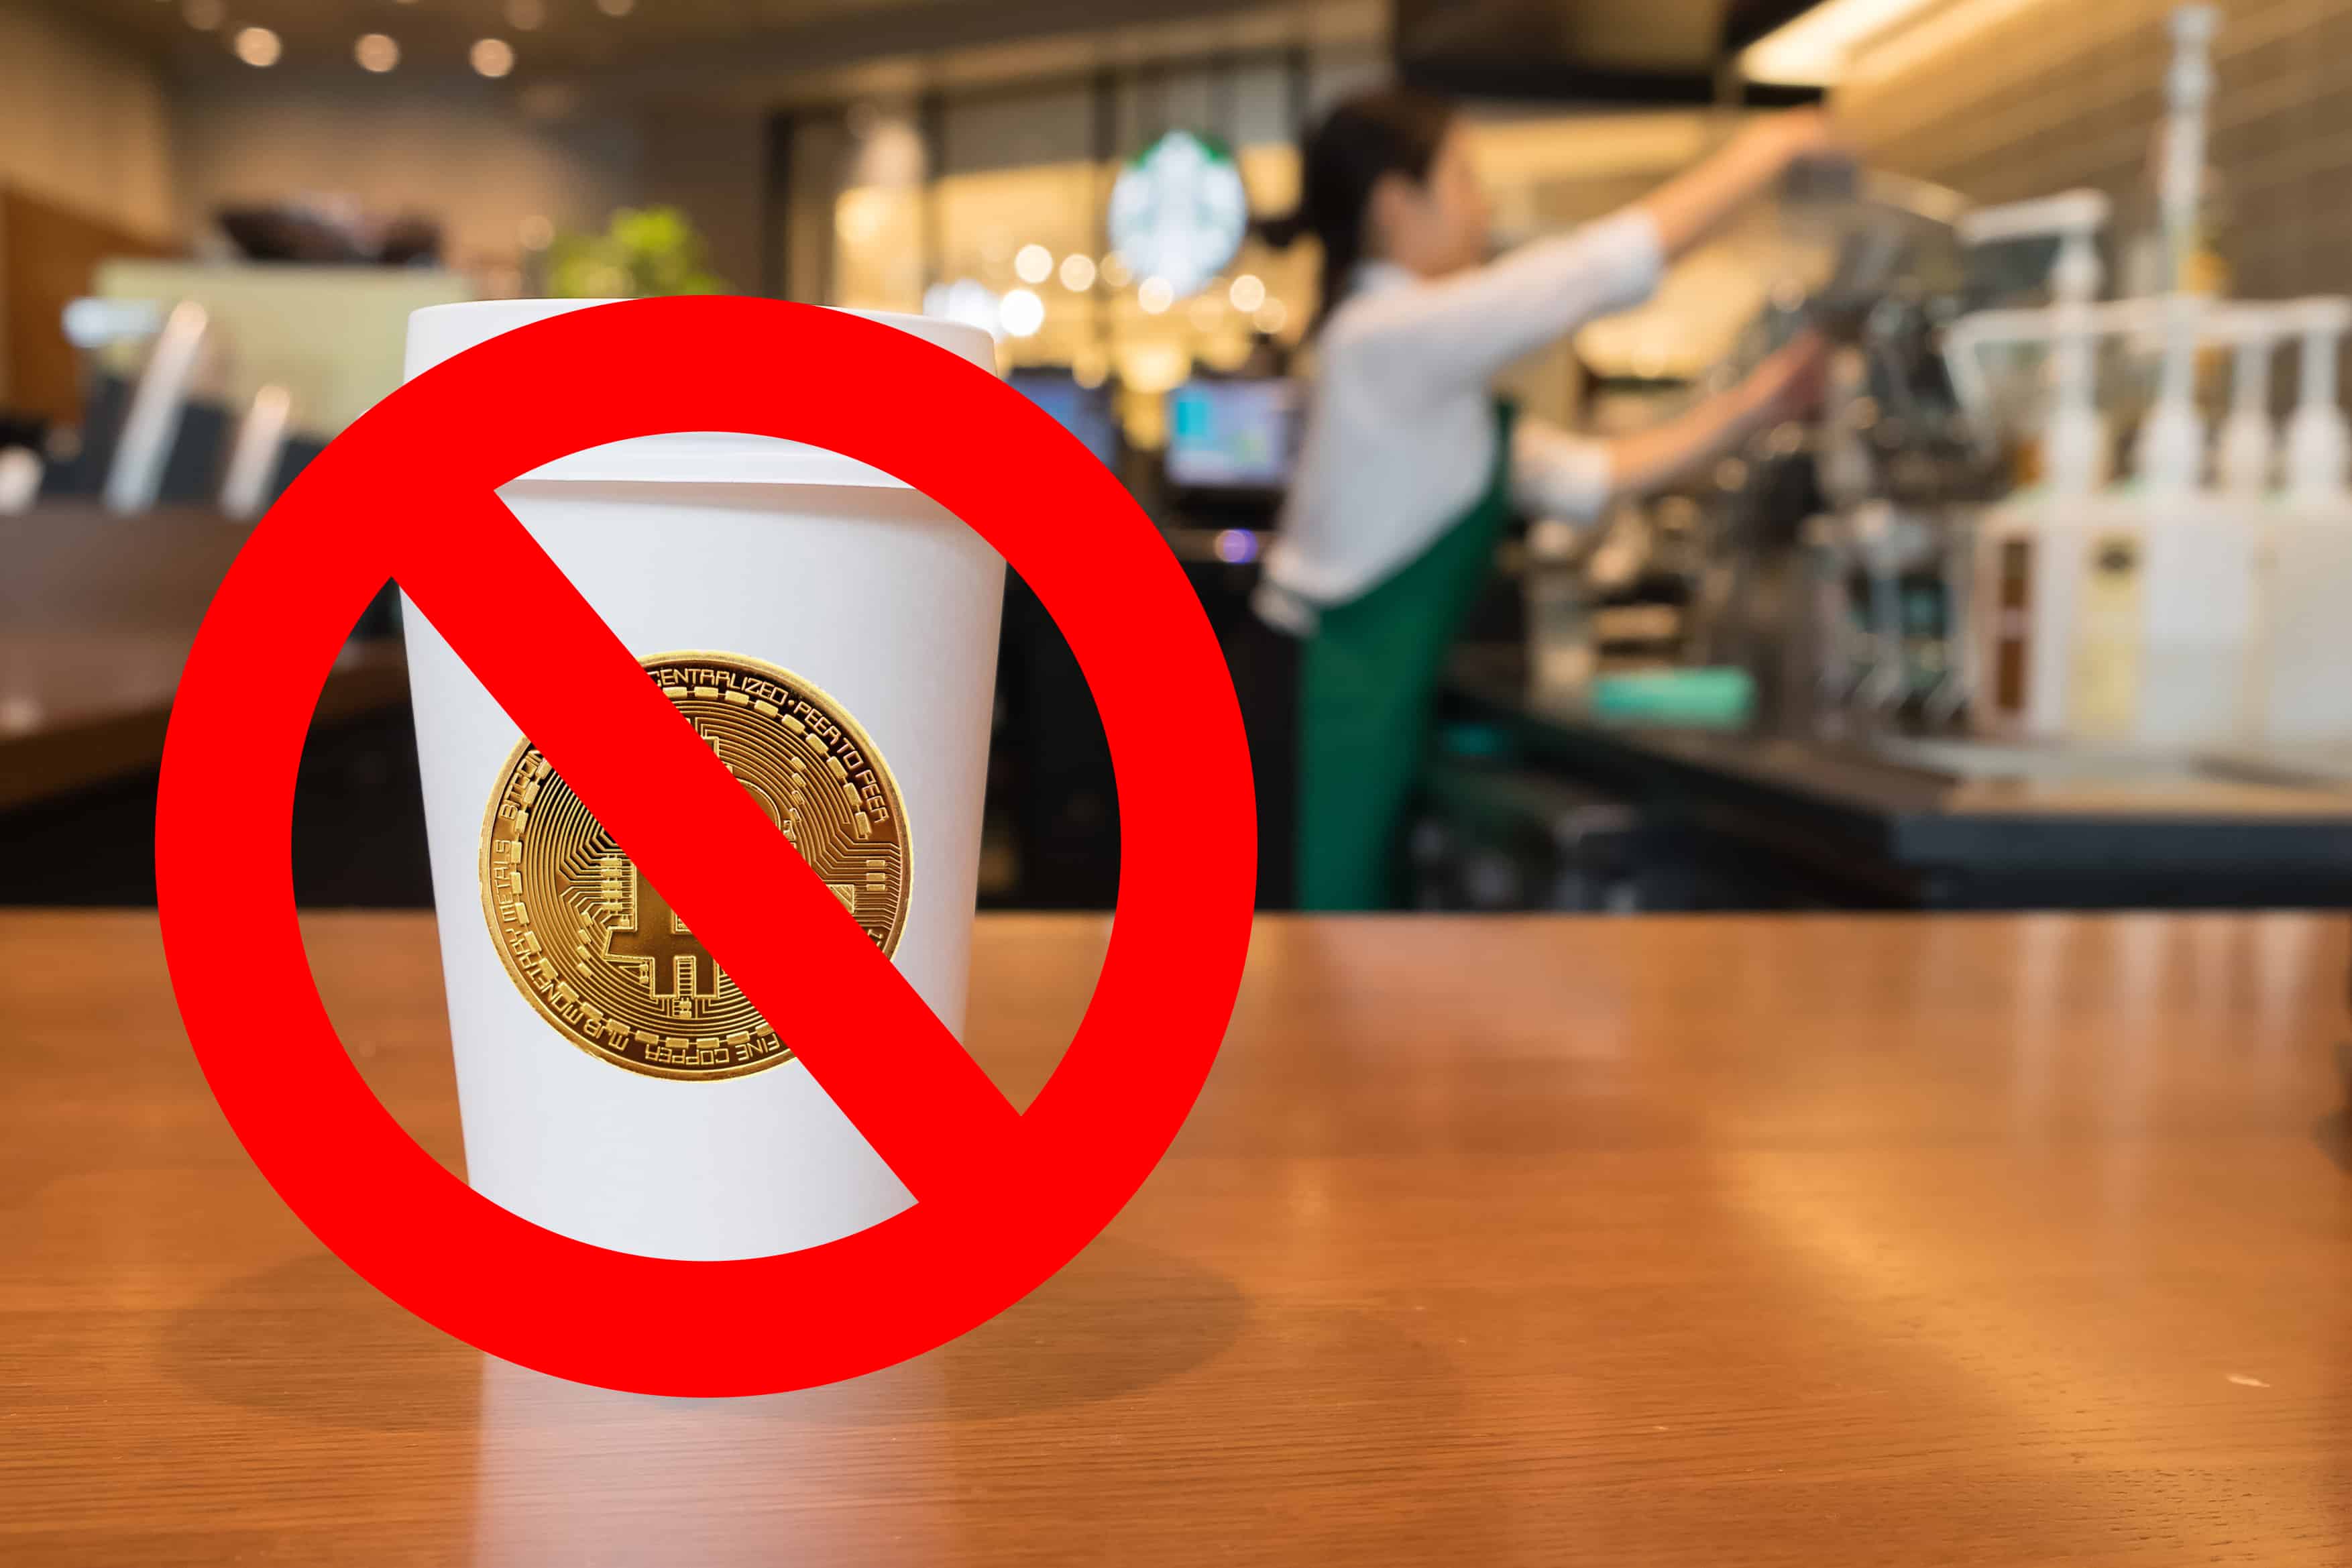 Starbucks Won't Accept Bitcoin For Frappuccinos, But It's getting into cryptocurrencies